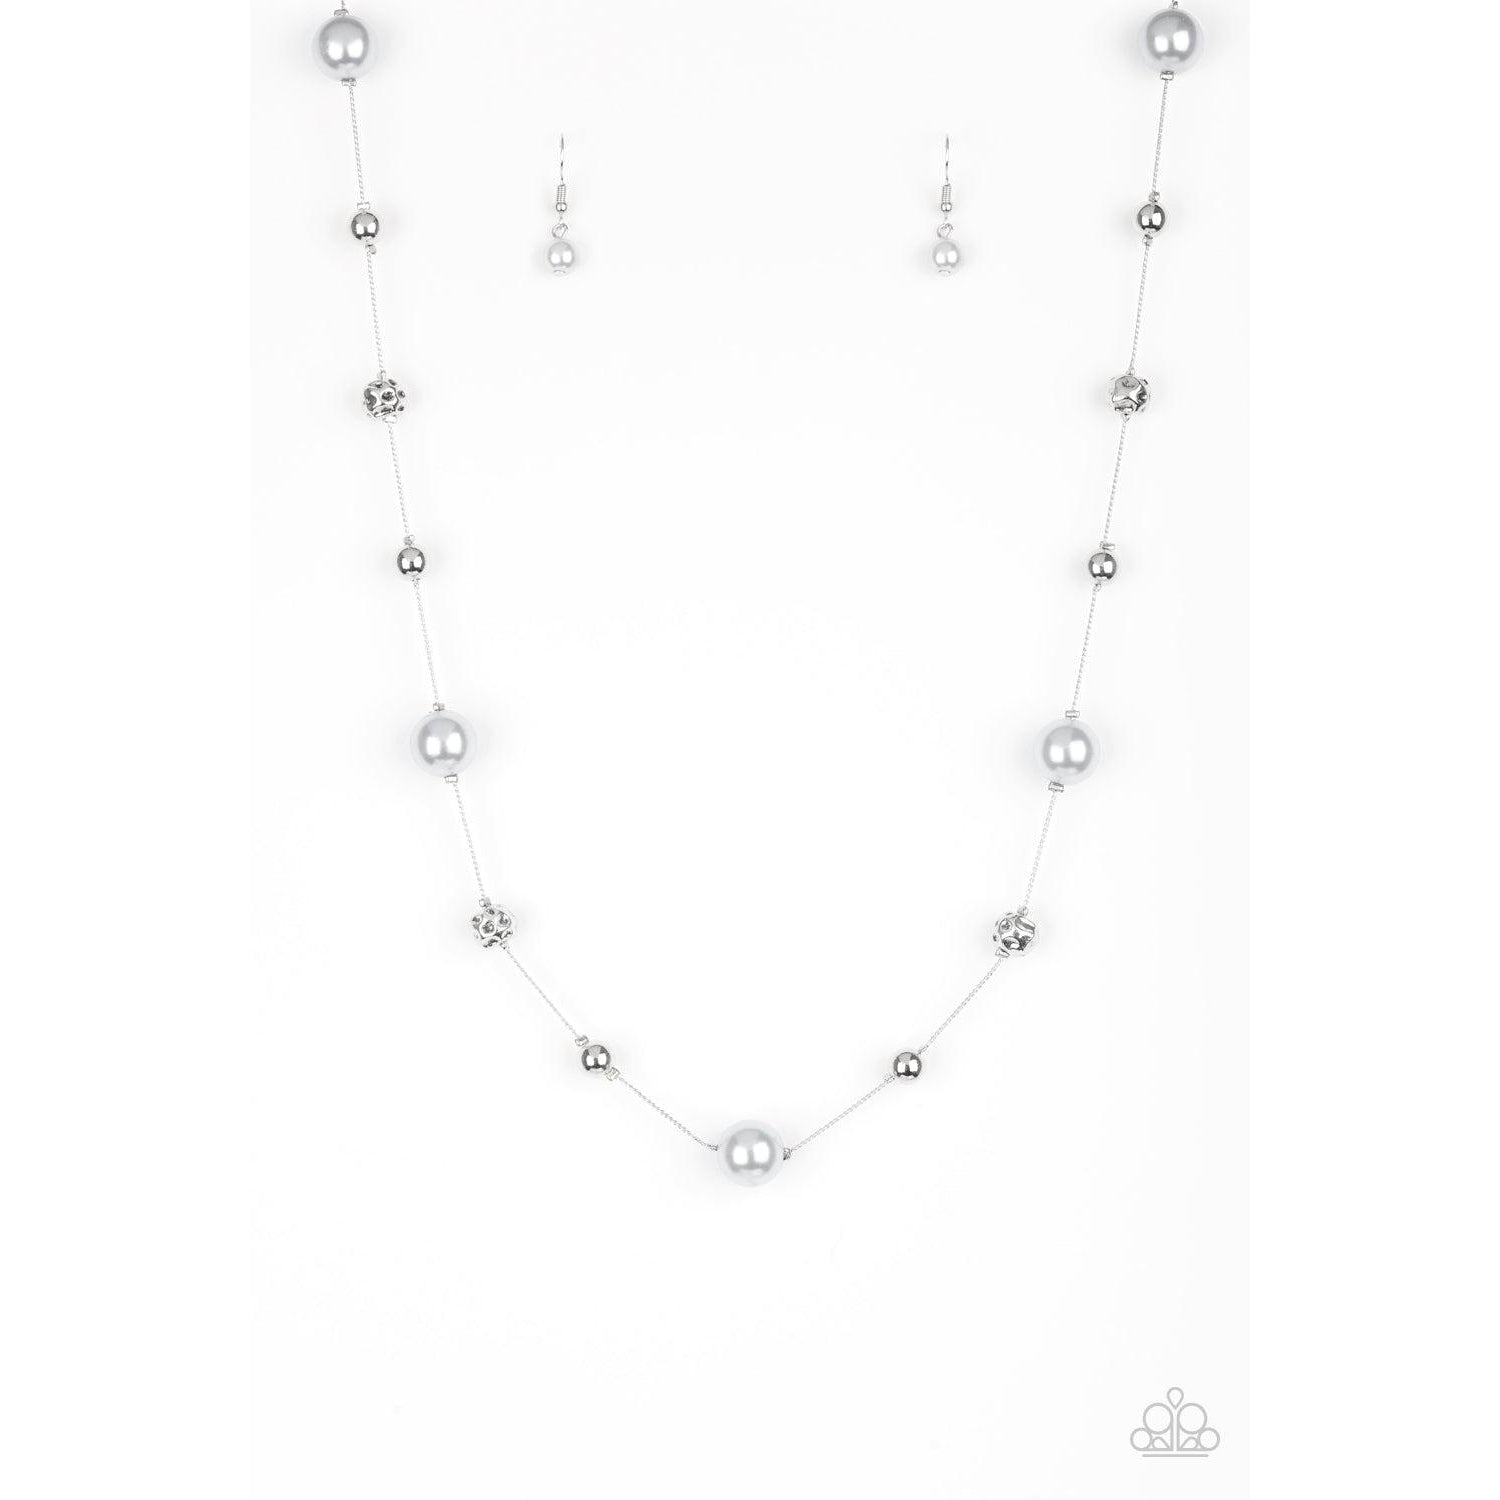 Paparazzi Eloquently Eloquent Silver Necklace & Earrings Set-Necklace-SPARKLE ARMAND